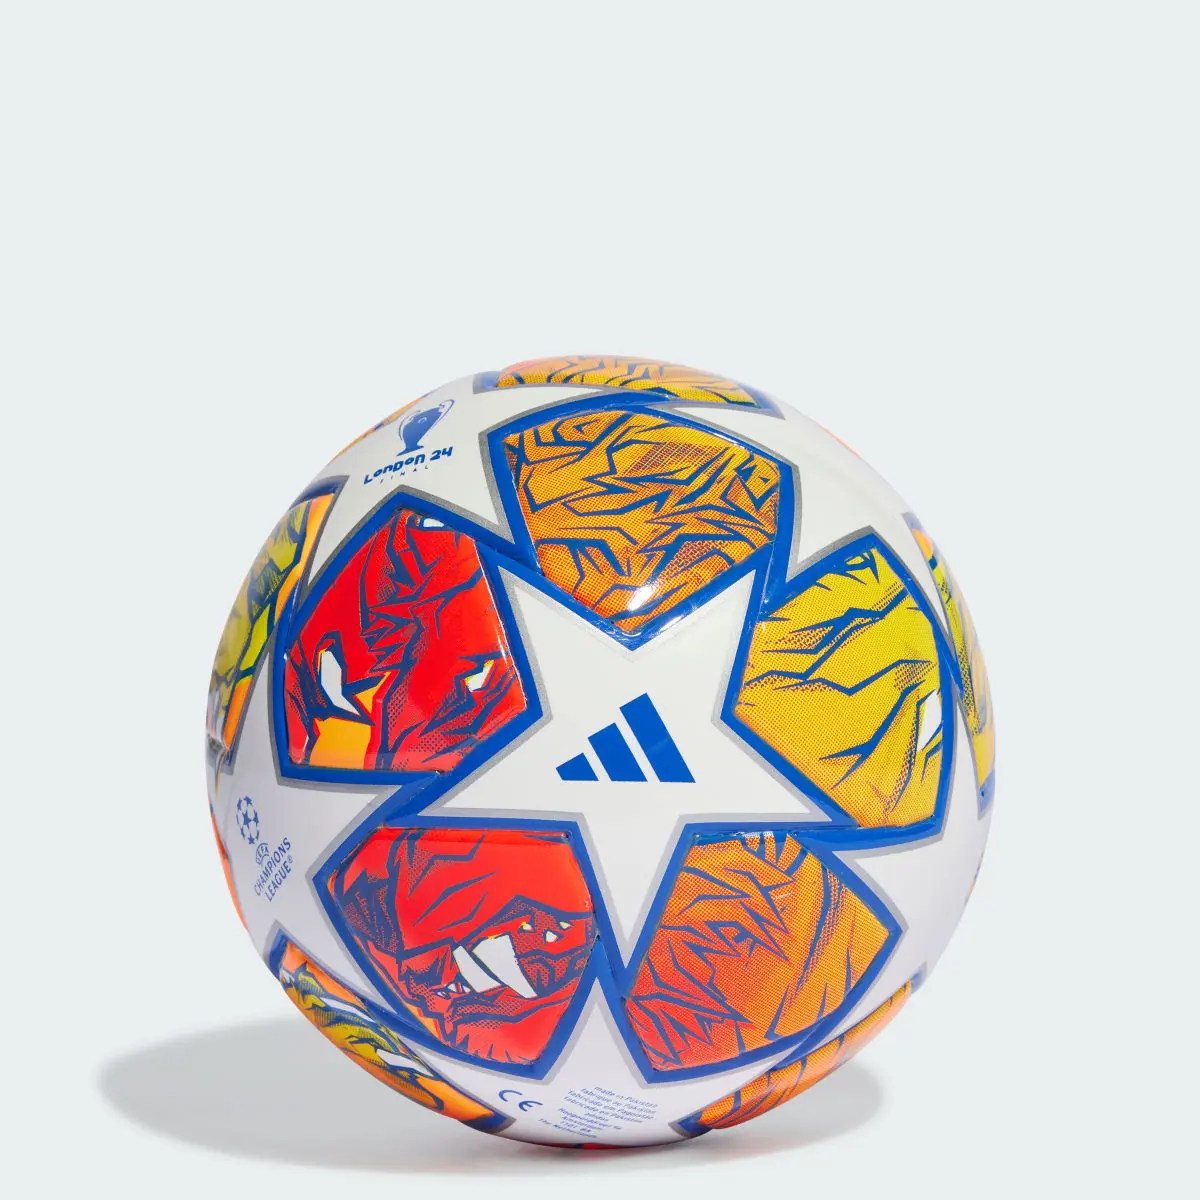 Adidas UCL 23/24 Knock-out Miniball. 1